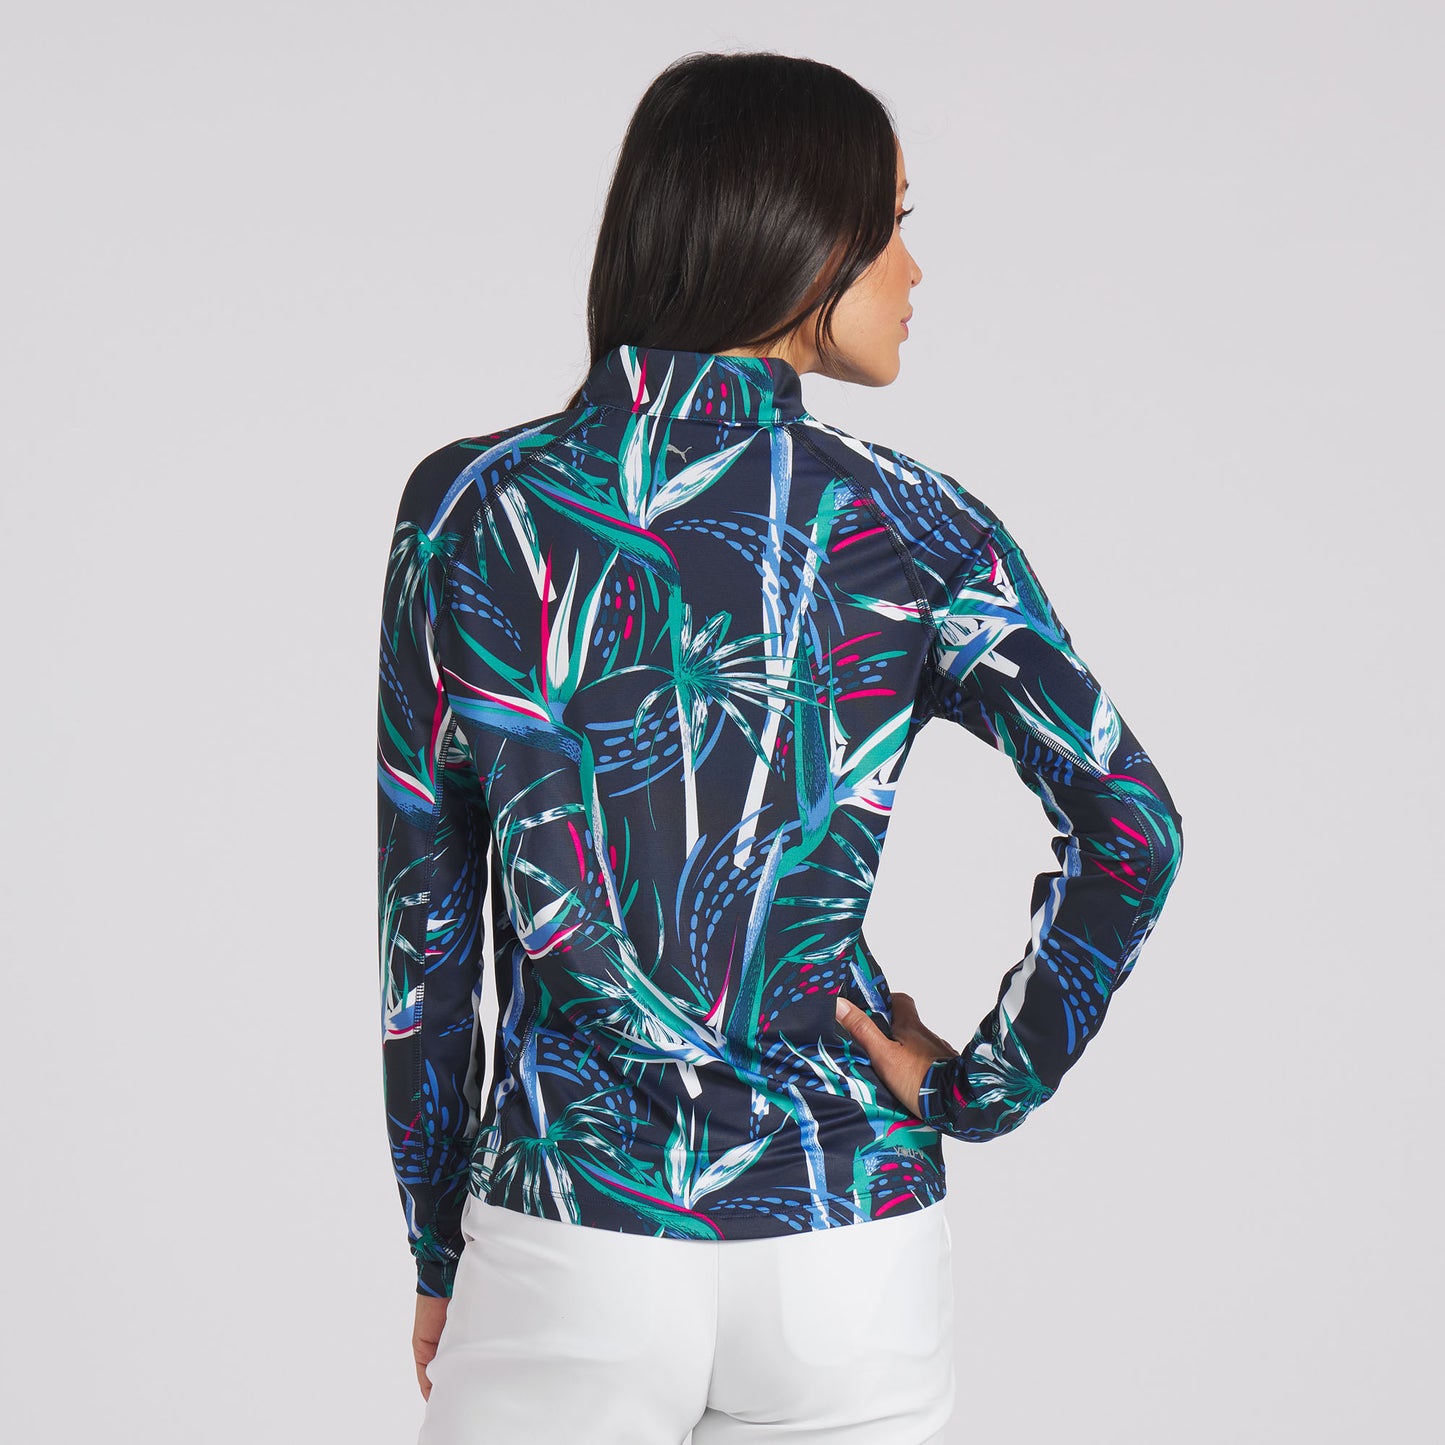 Puma Women's YOU-V Top with UPF 50+ in Deep-Navy Paradise Print